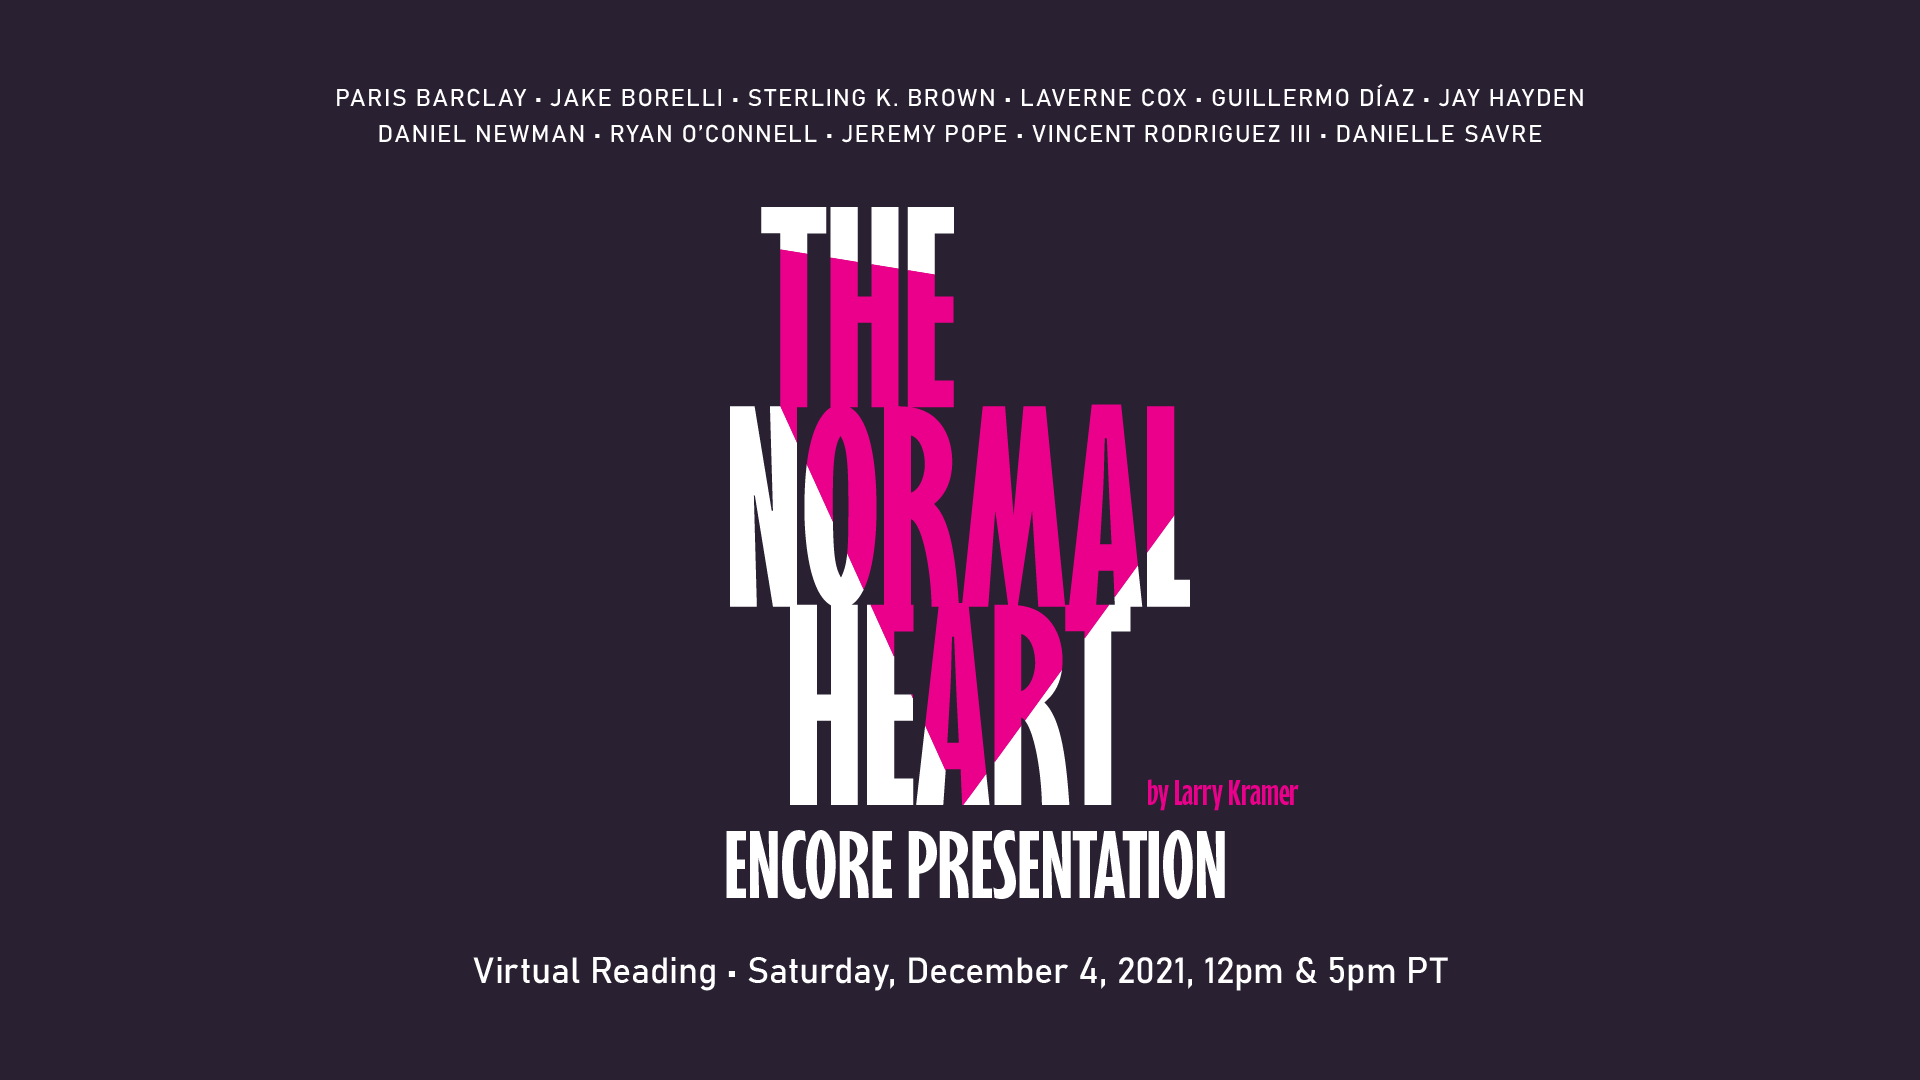 Dec 4, 2021: encore presentation of THE NORMAL HEART virtual reading, in honor of World AIDS Day 2021